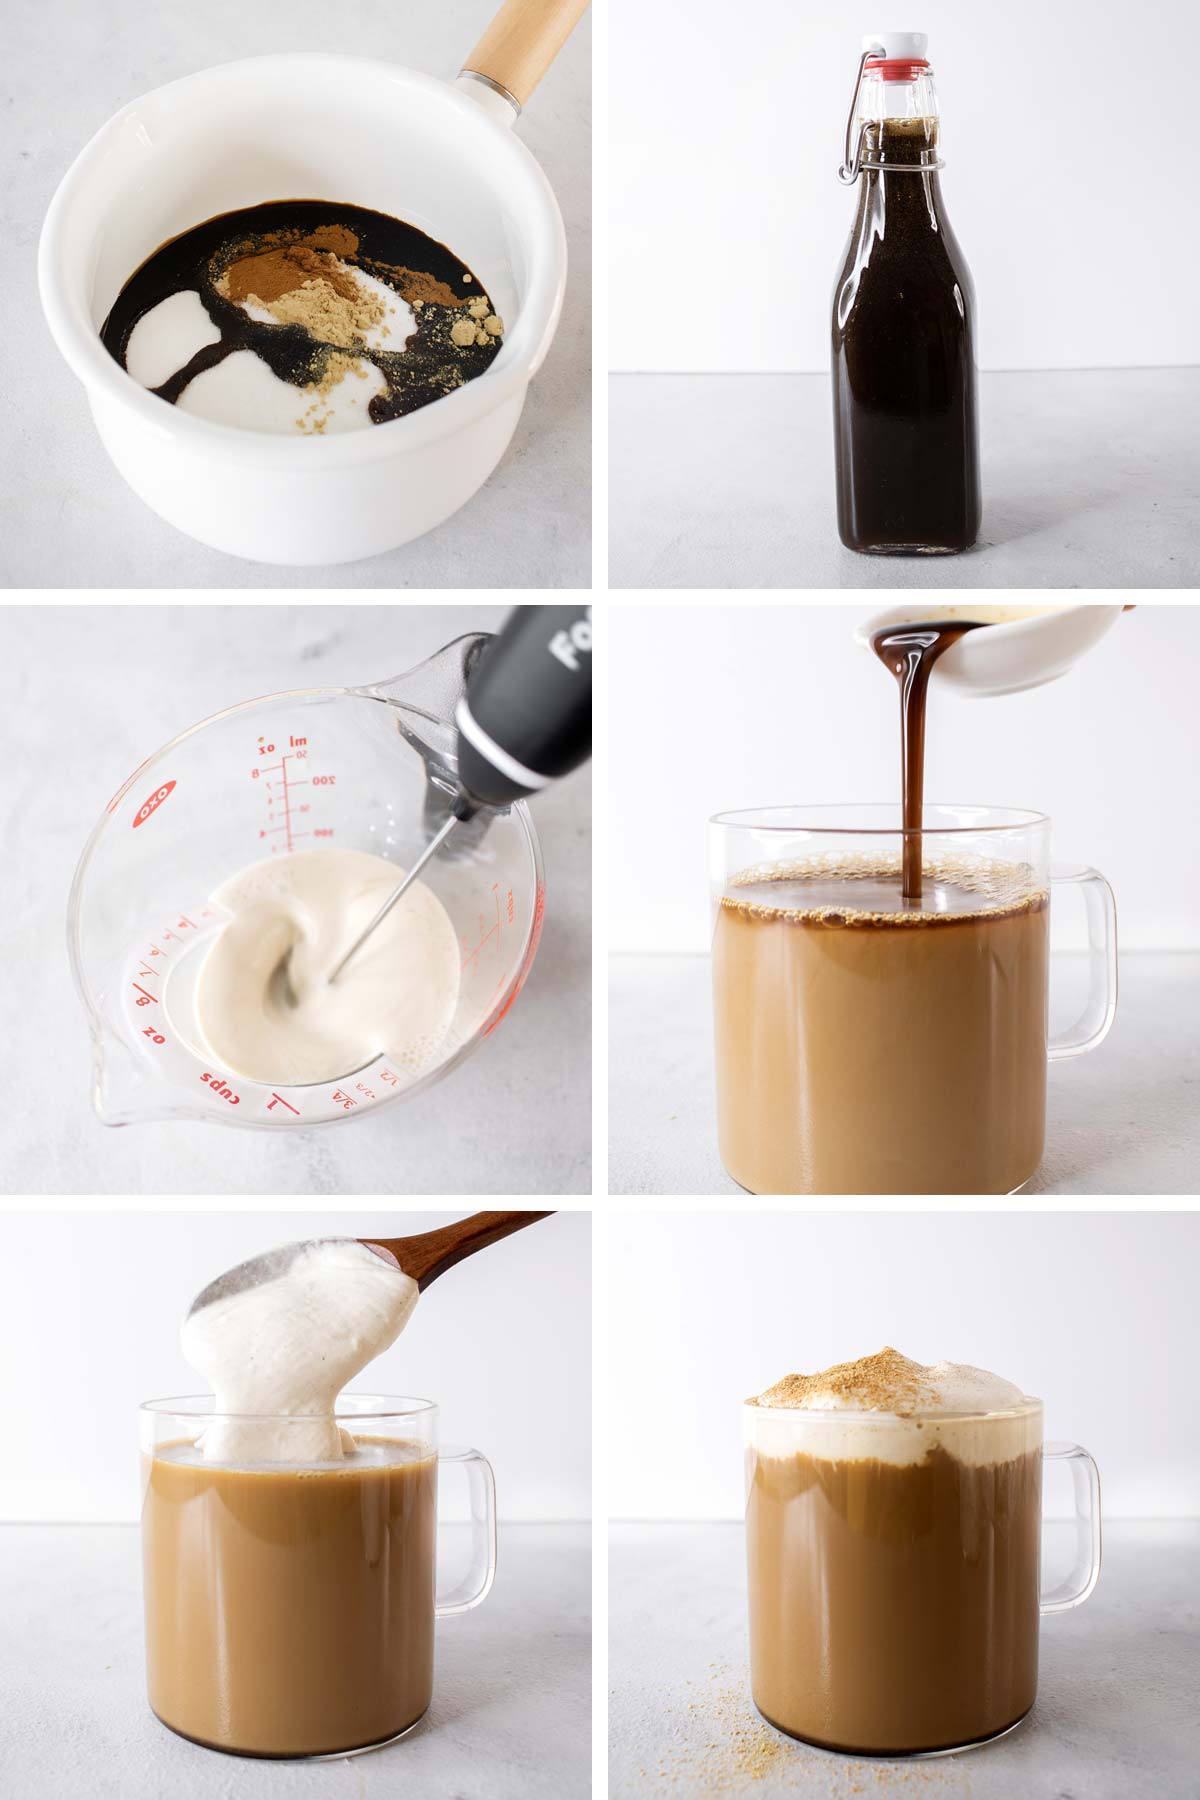 Six photos showing step-by-step process to make gingerbread latte.